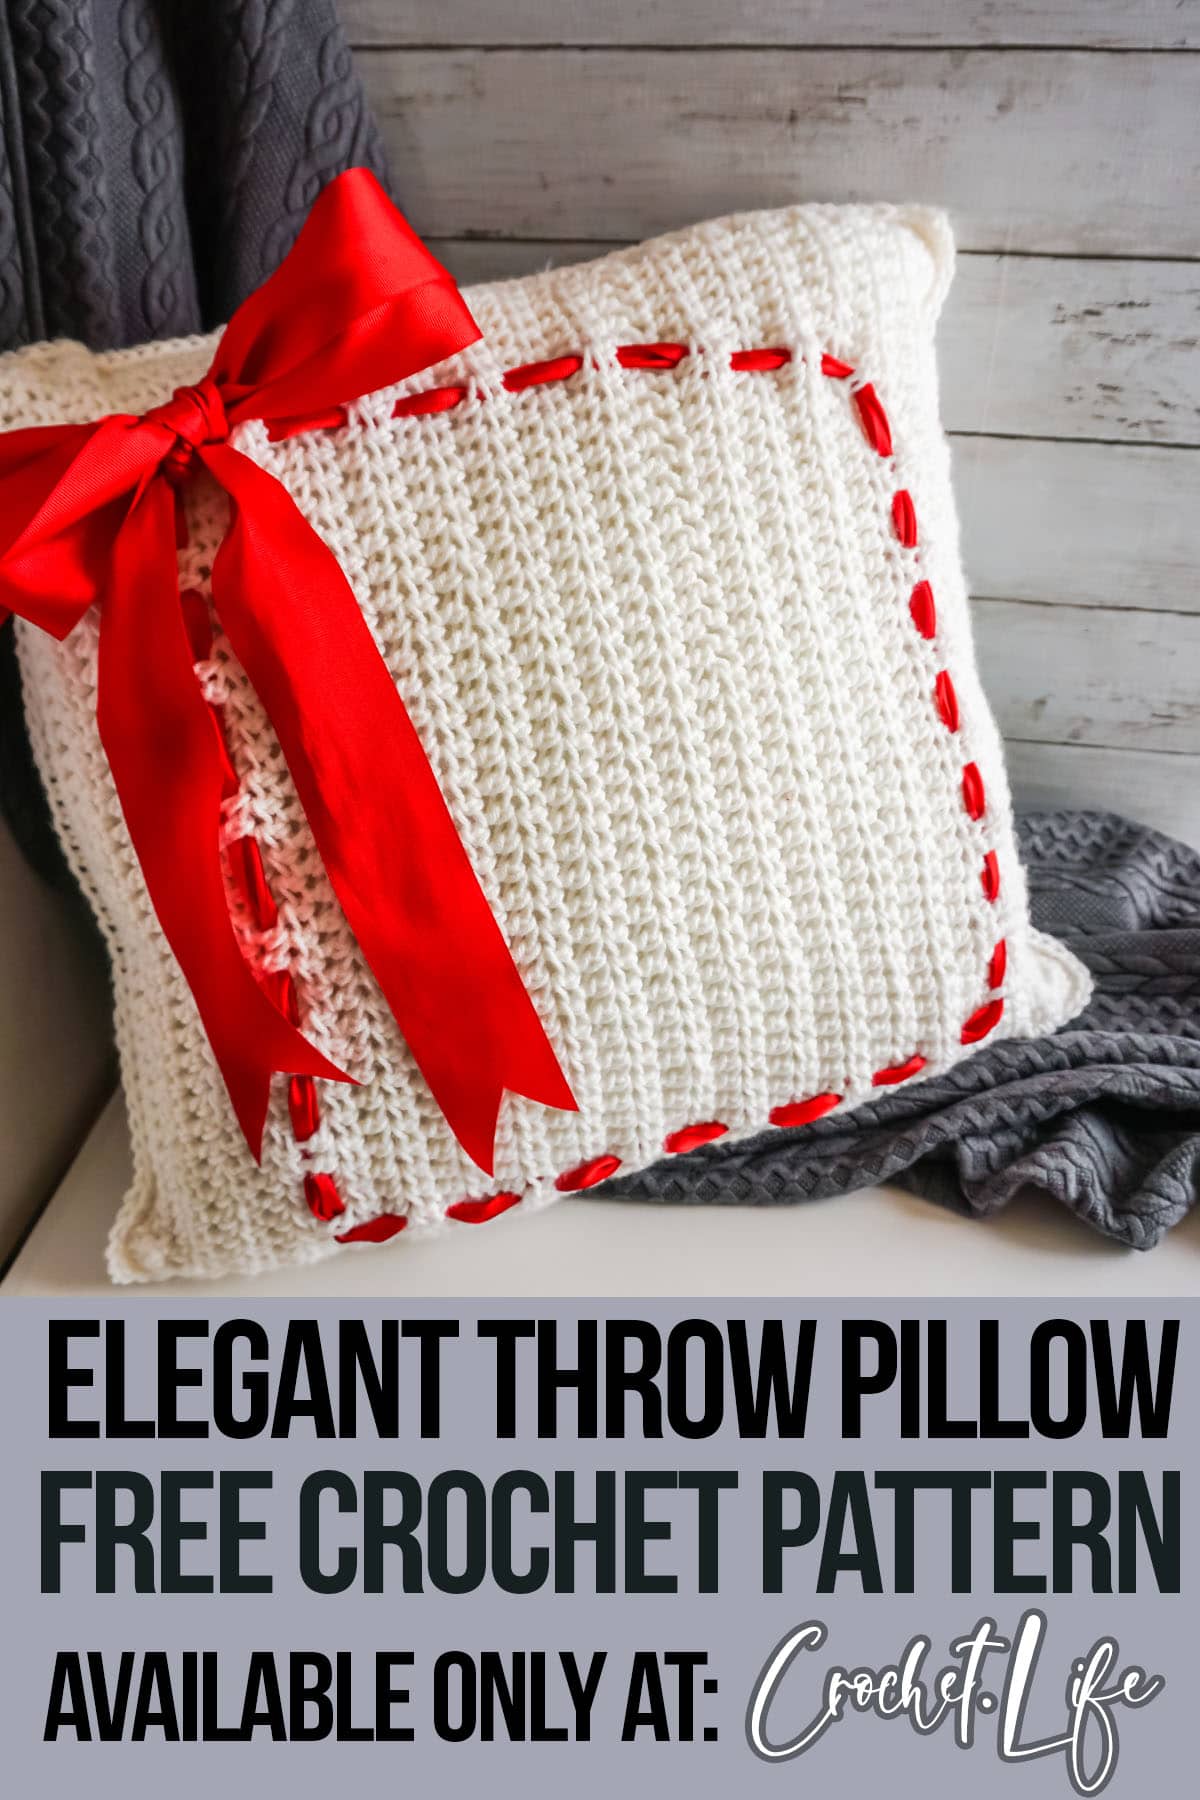 easy crochet pillow pattern with text which reads elegant throw pillow free crochet pattern